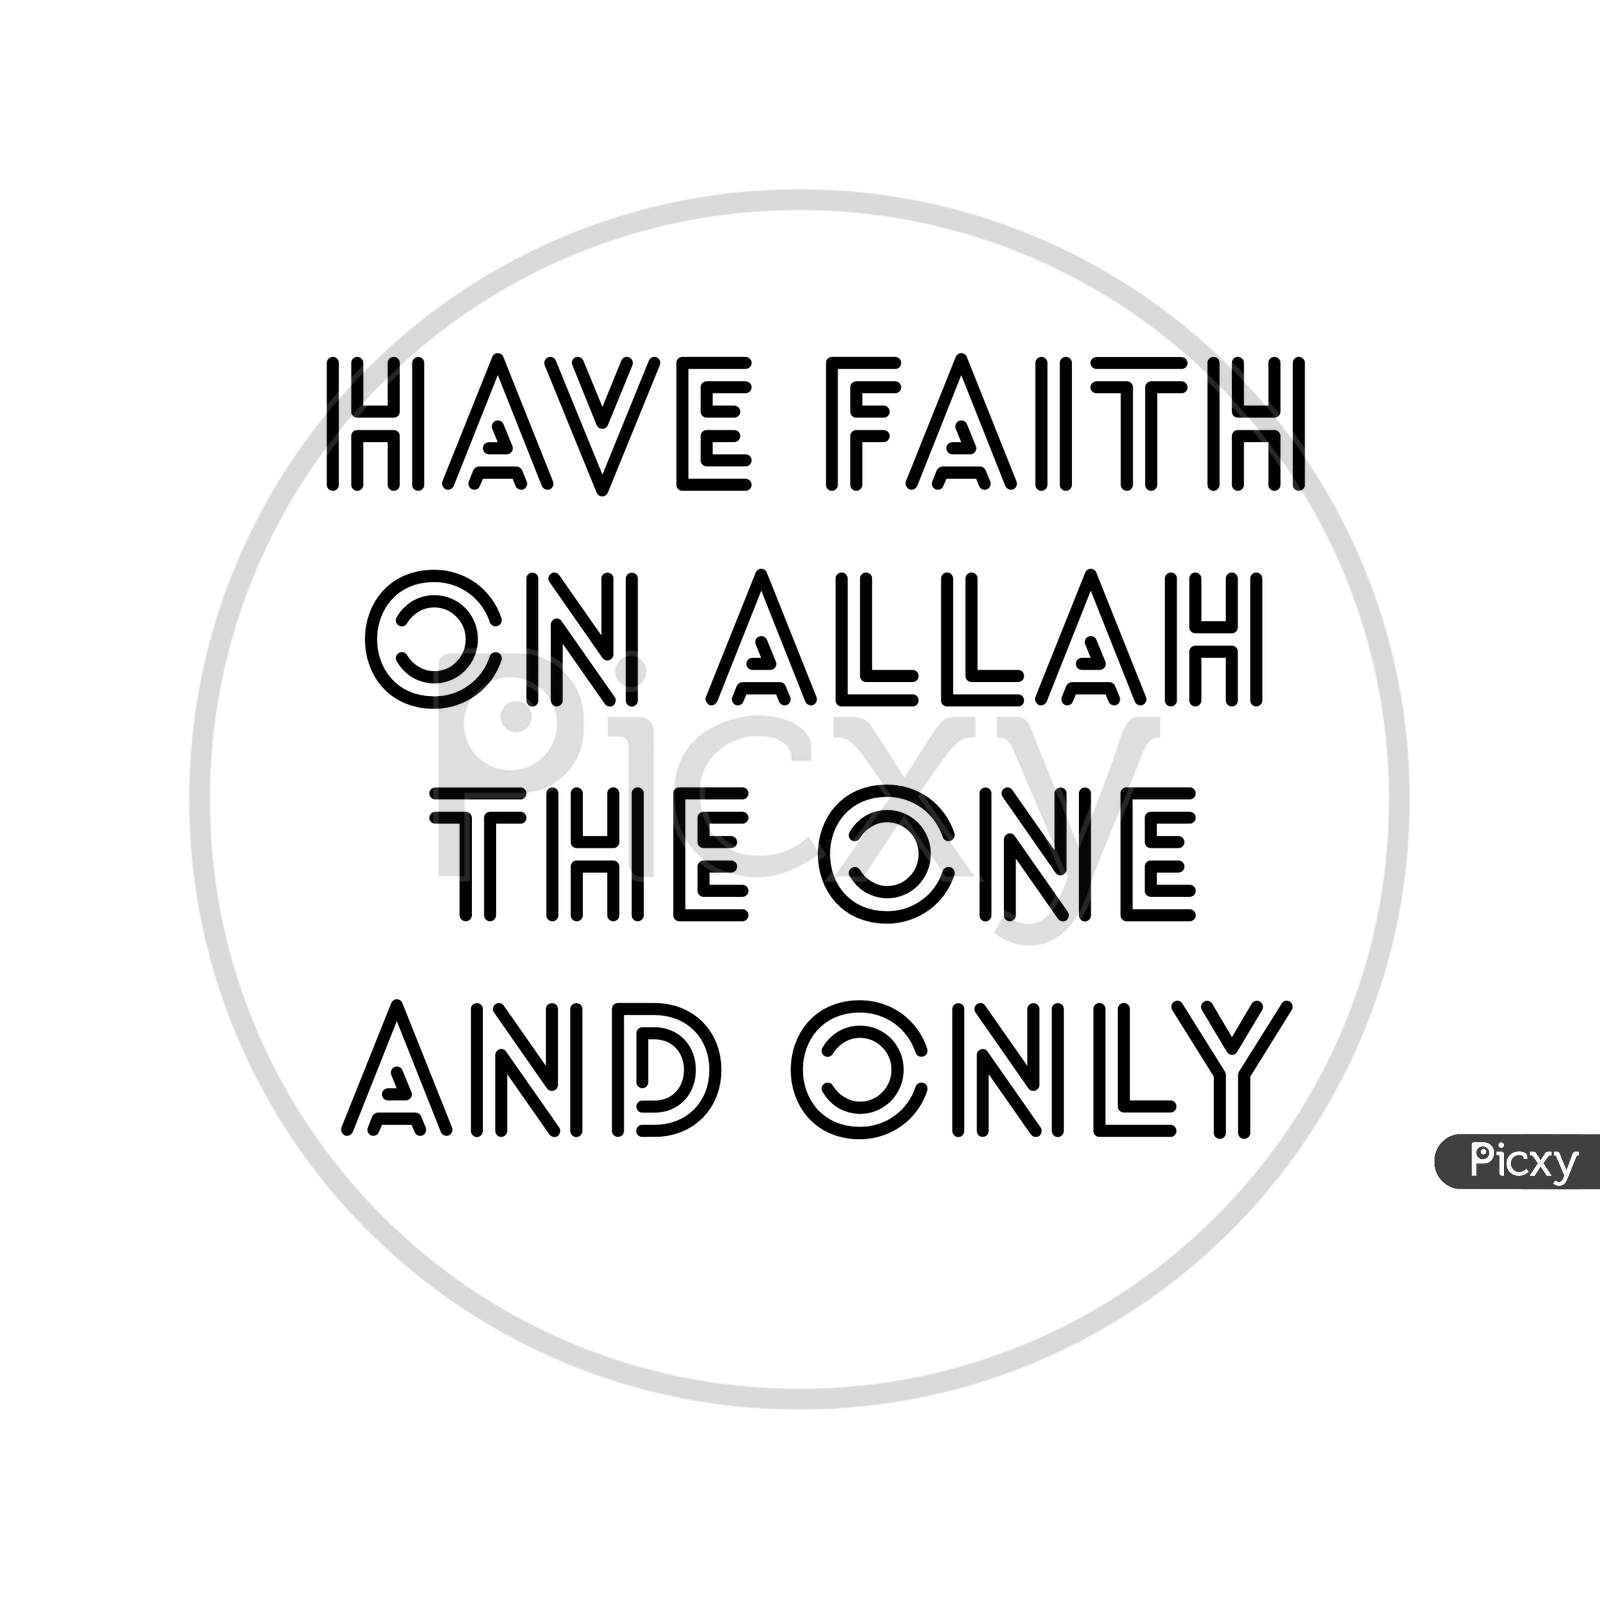 Image With A Text "Have Faith On Allah The One And Only"